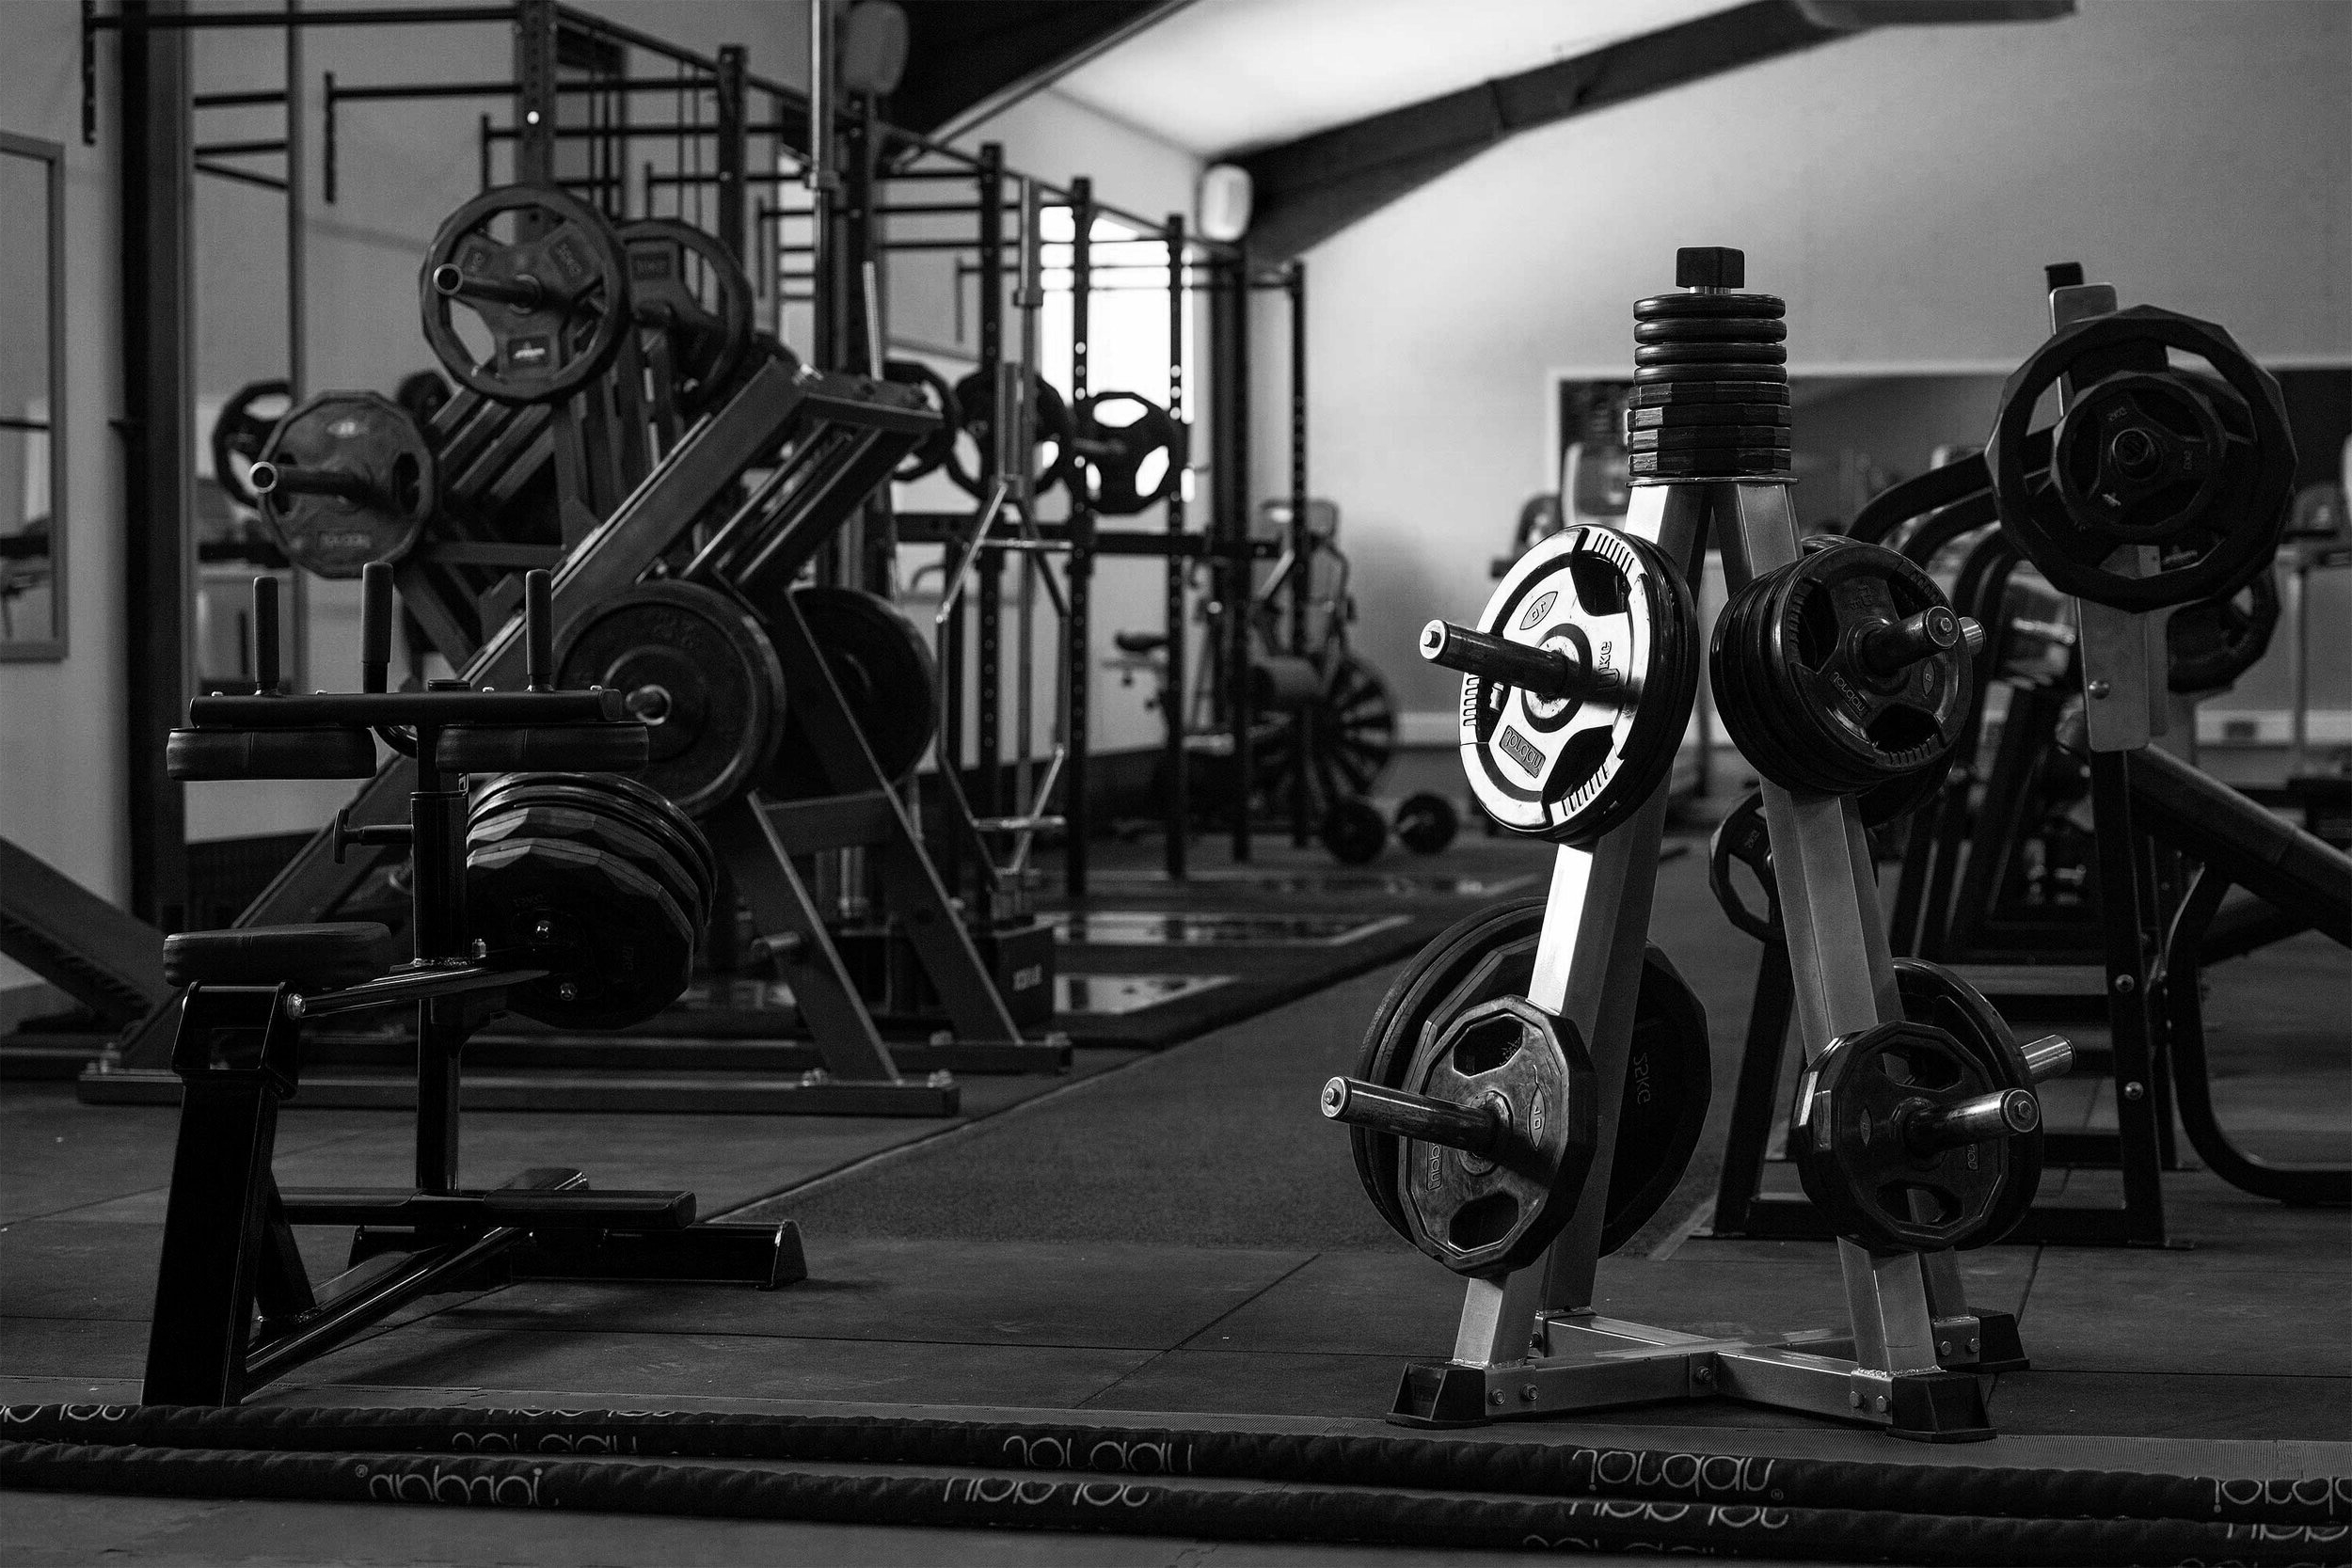 New & Refurbished Gym & Fitness Equipment For Sale - Fitness